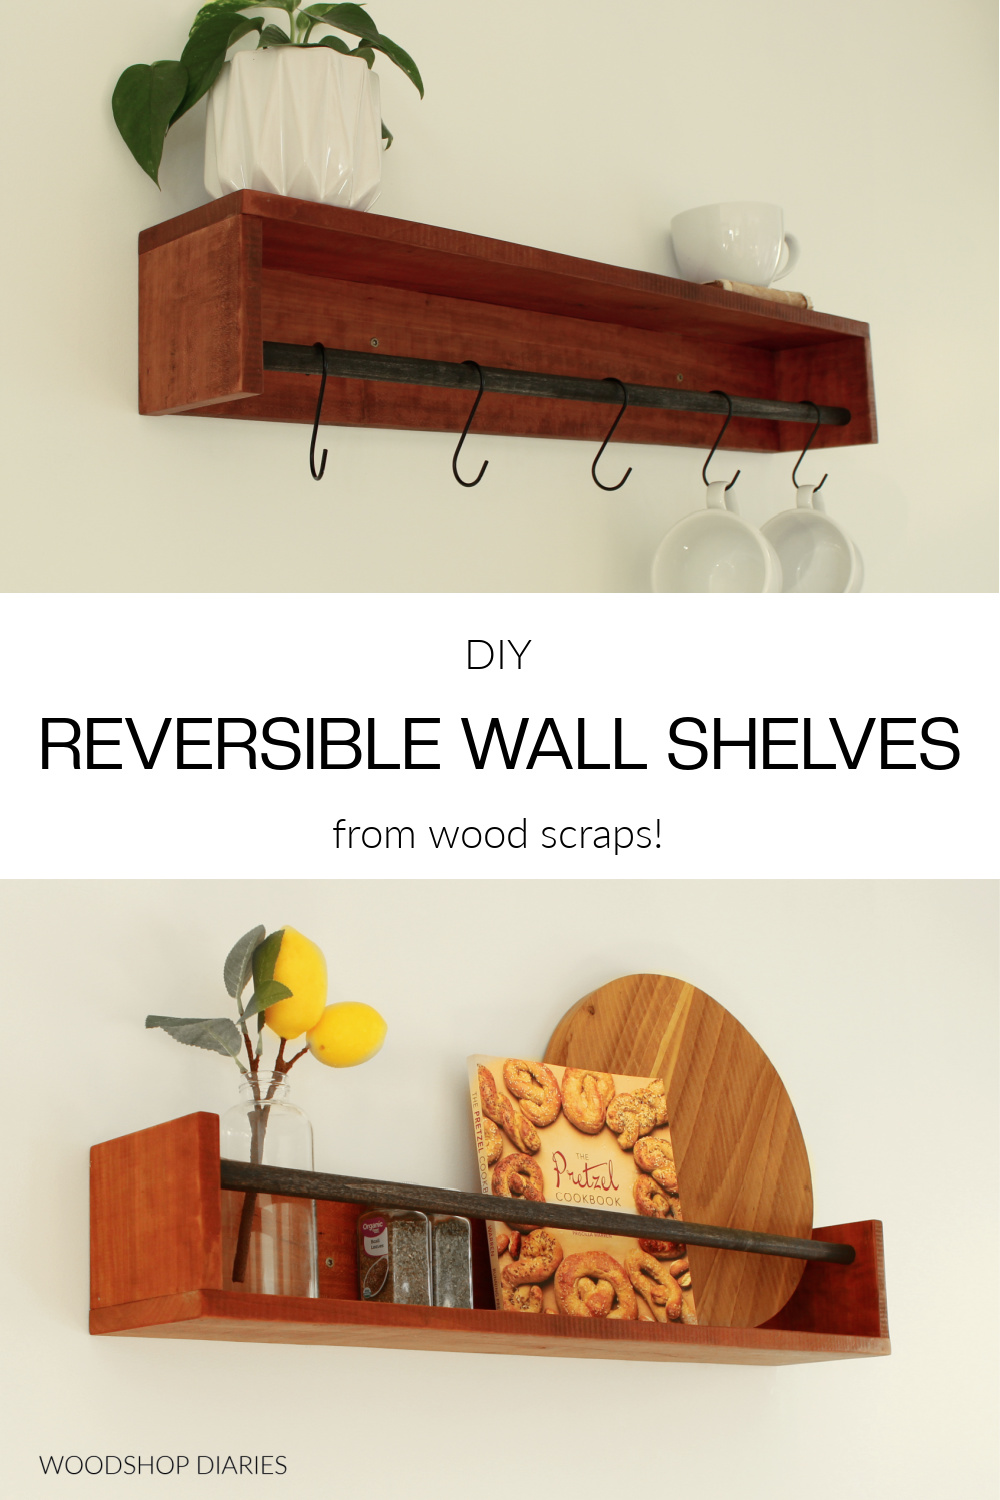 Pinterest collage showing shelf with coffee mugs at top and shelf as book rack at bottom with text "DIY Reversible wall shelves from wood scraps"